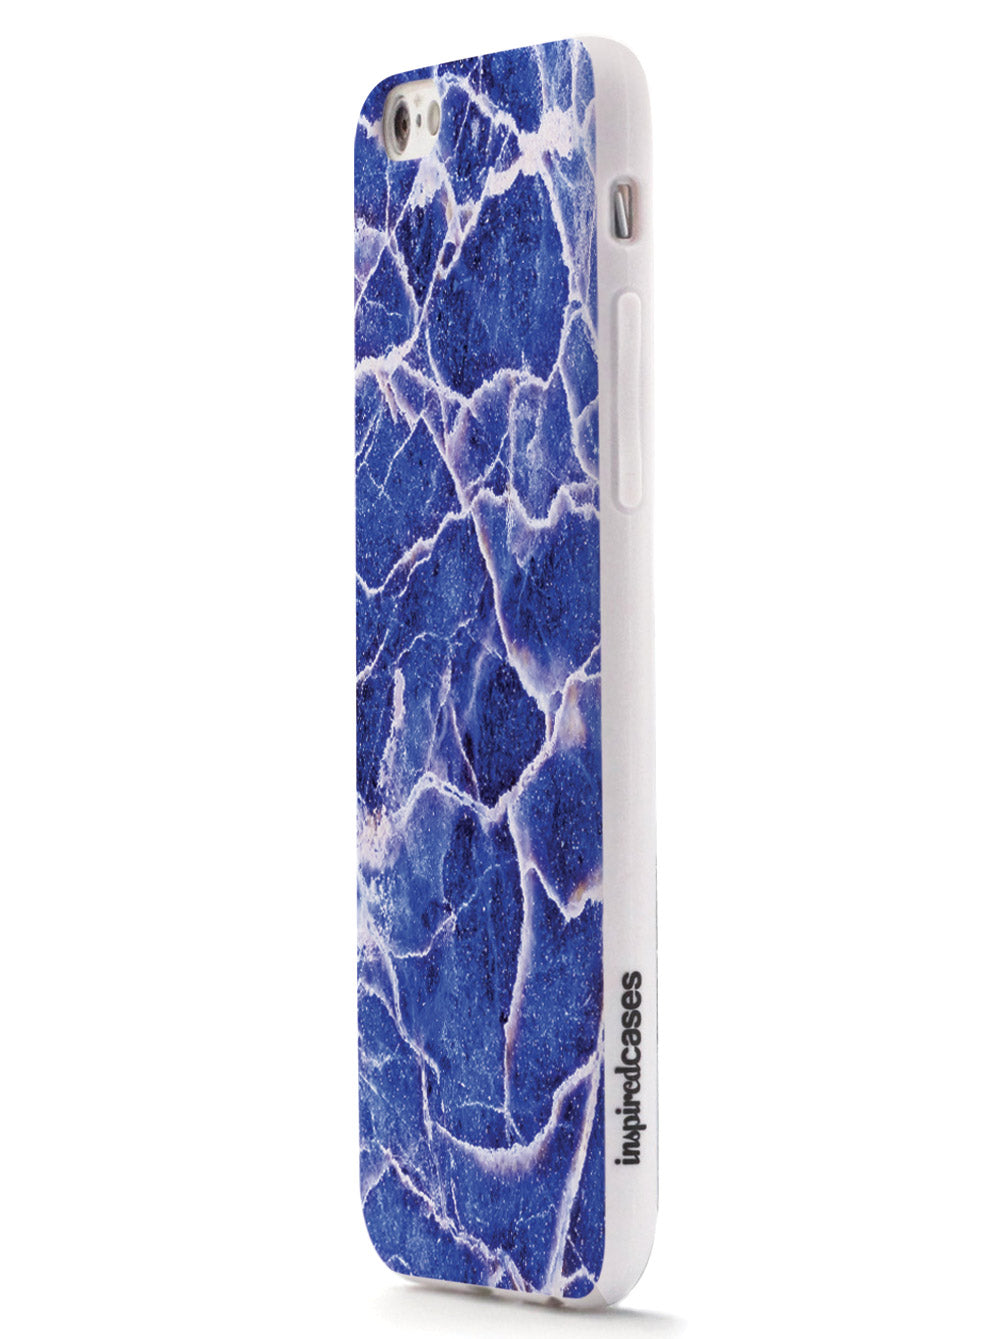 Textured Blue and White Marble Case